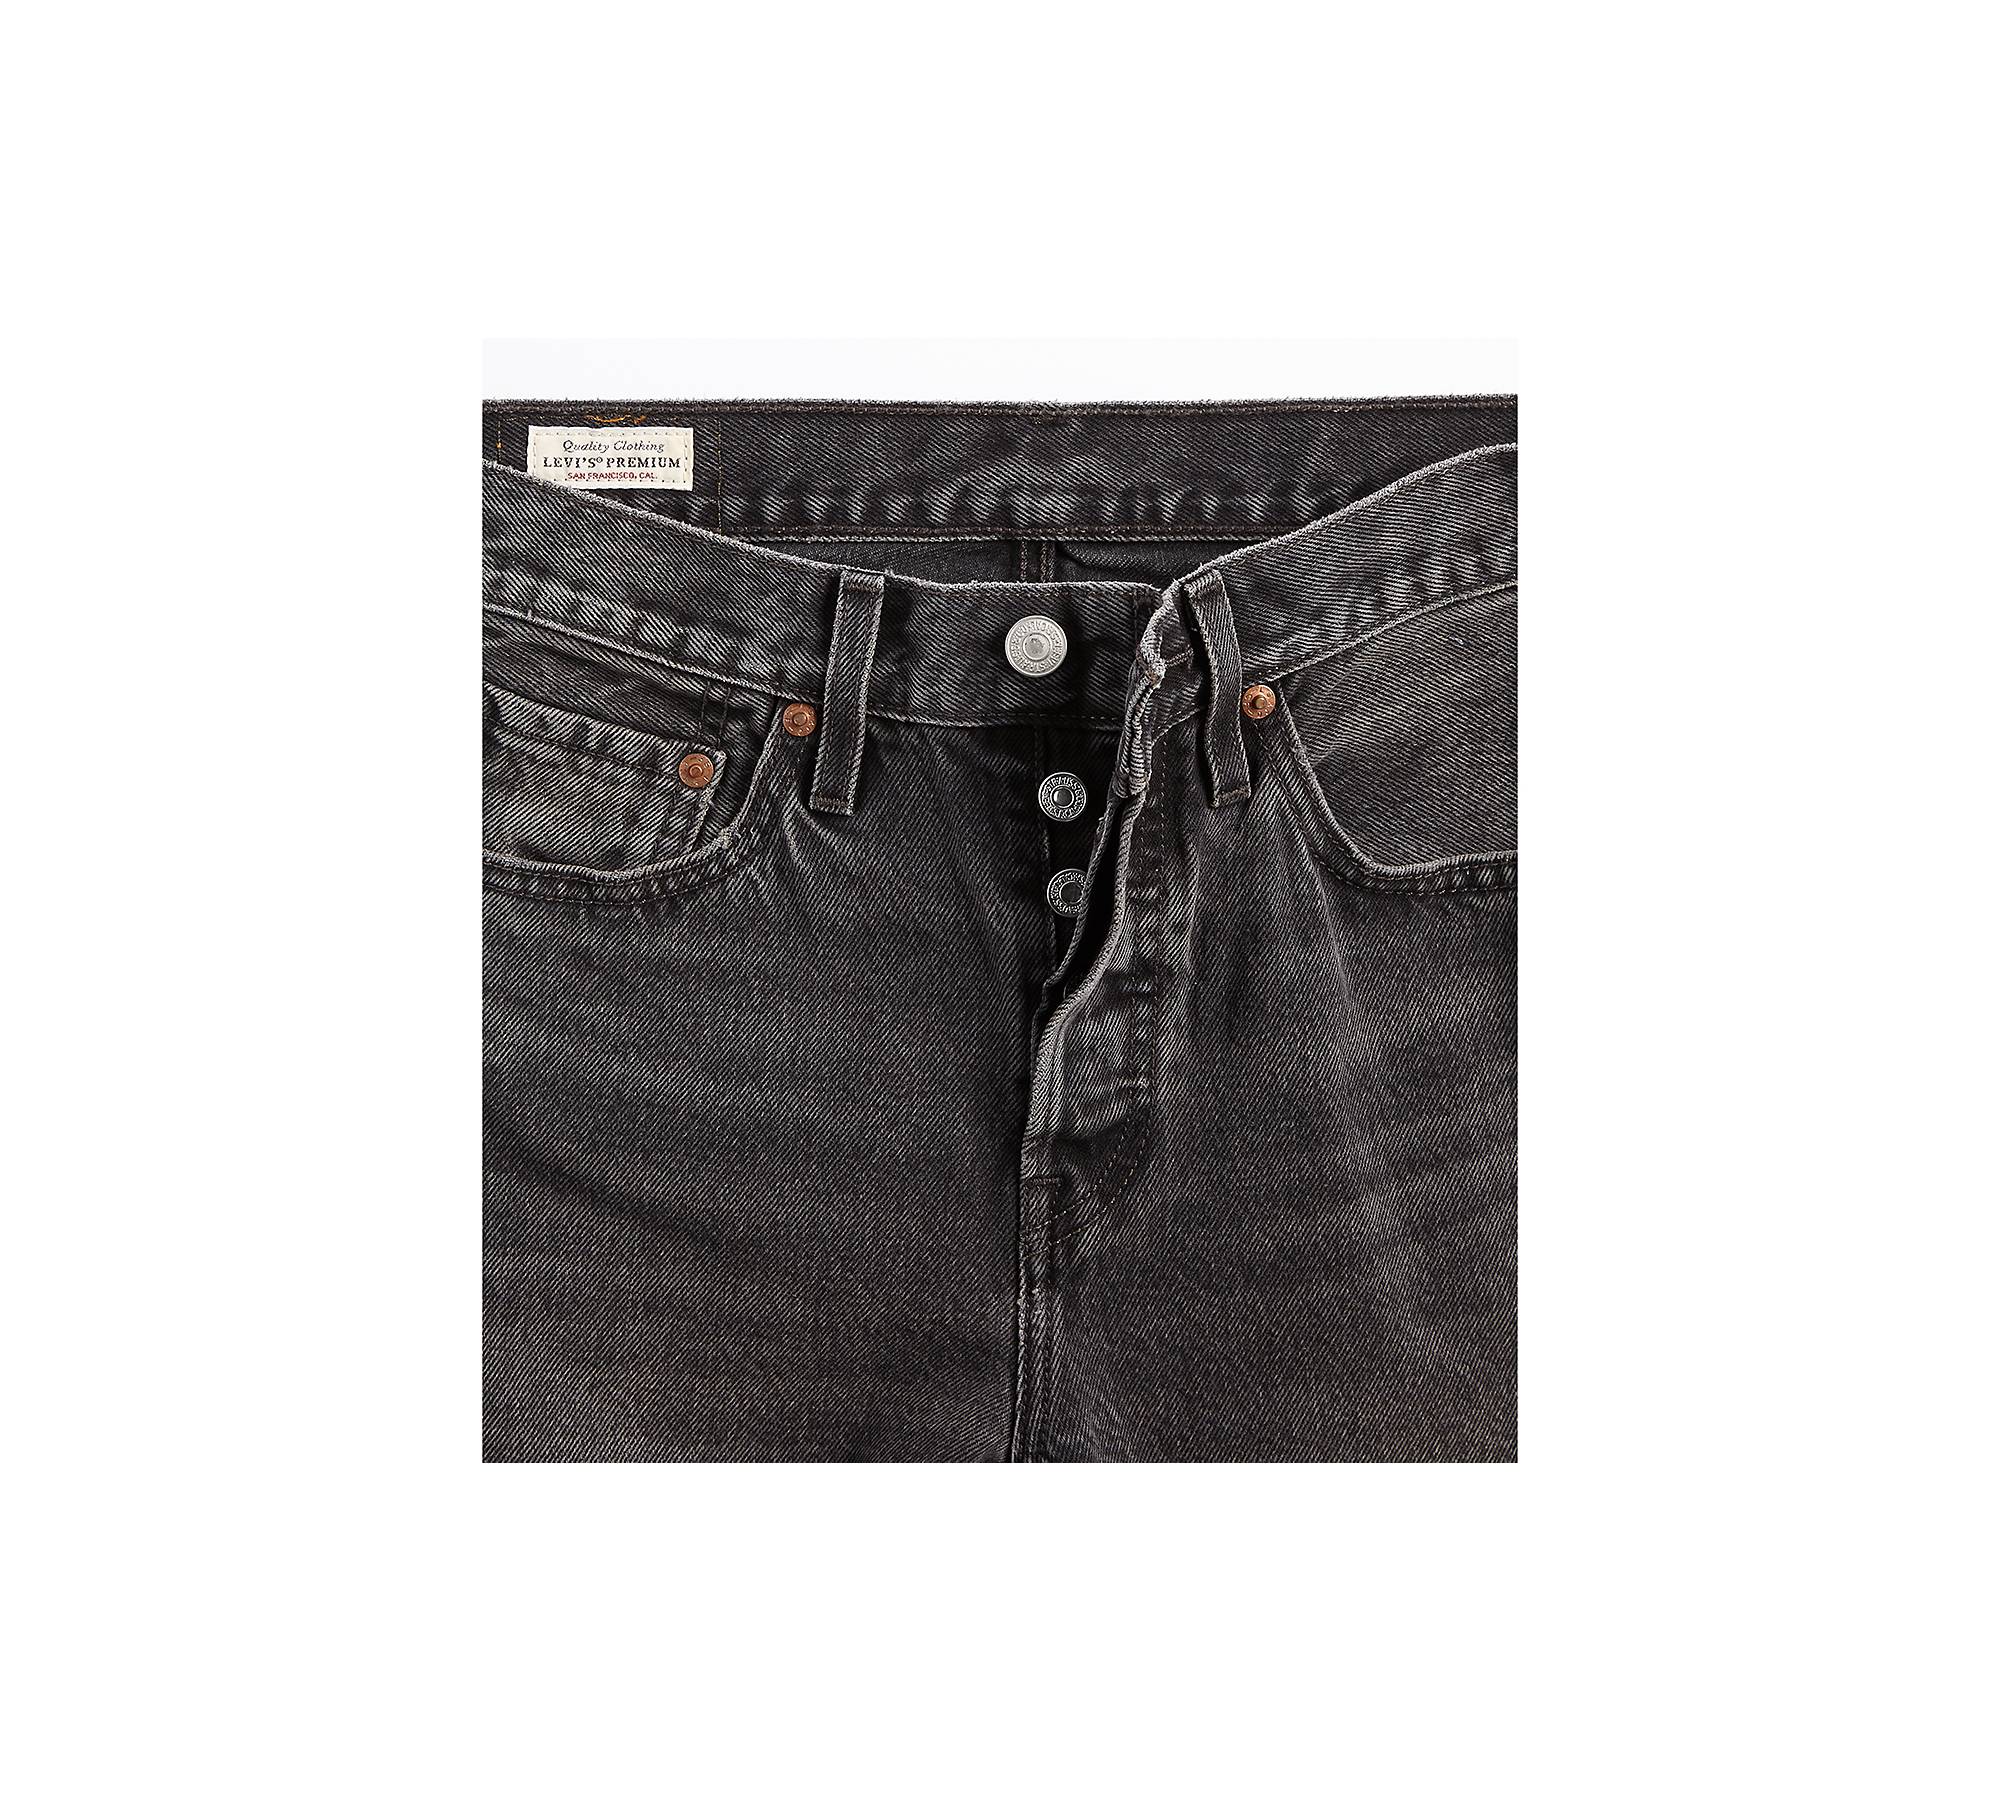 Buy Washed Black Straight 100% Cotton Authentic Jeans from Next USA